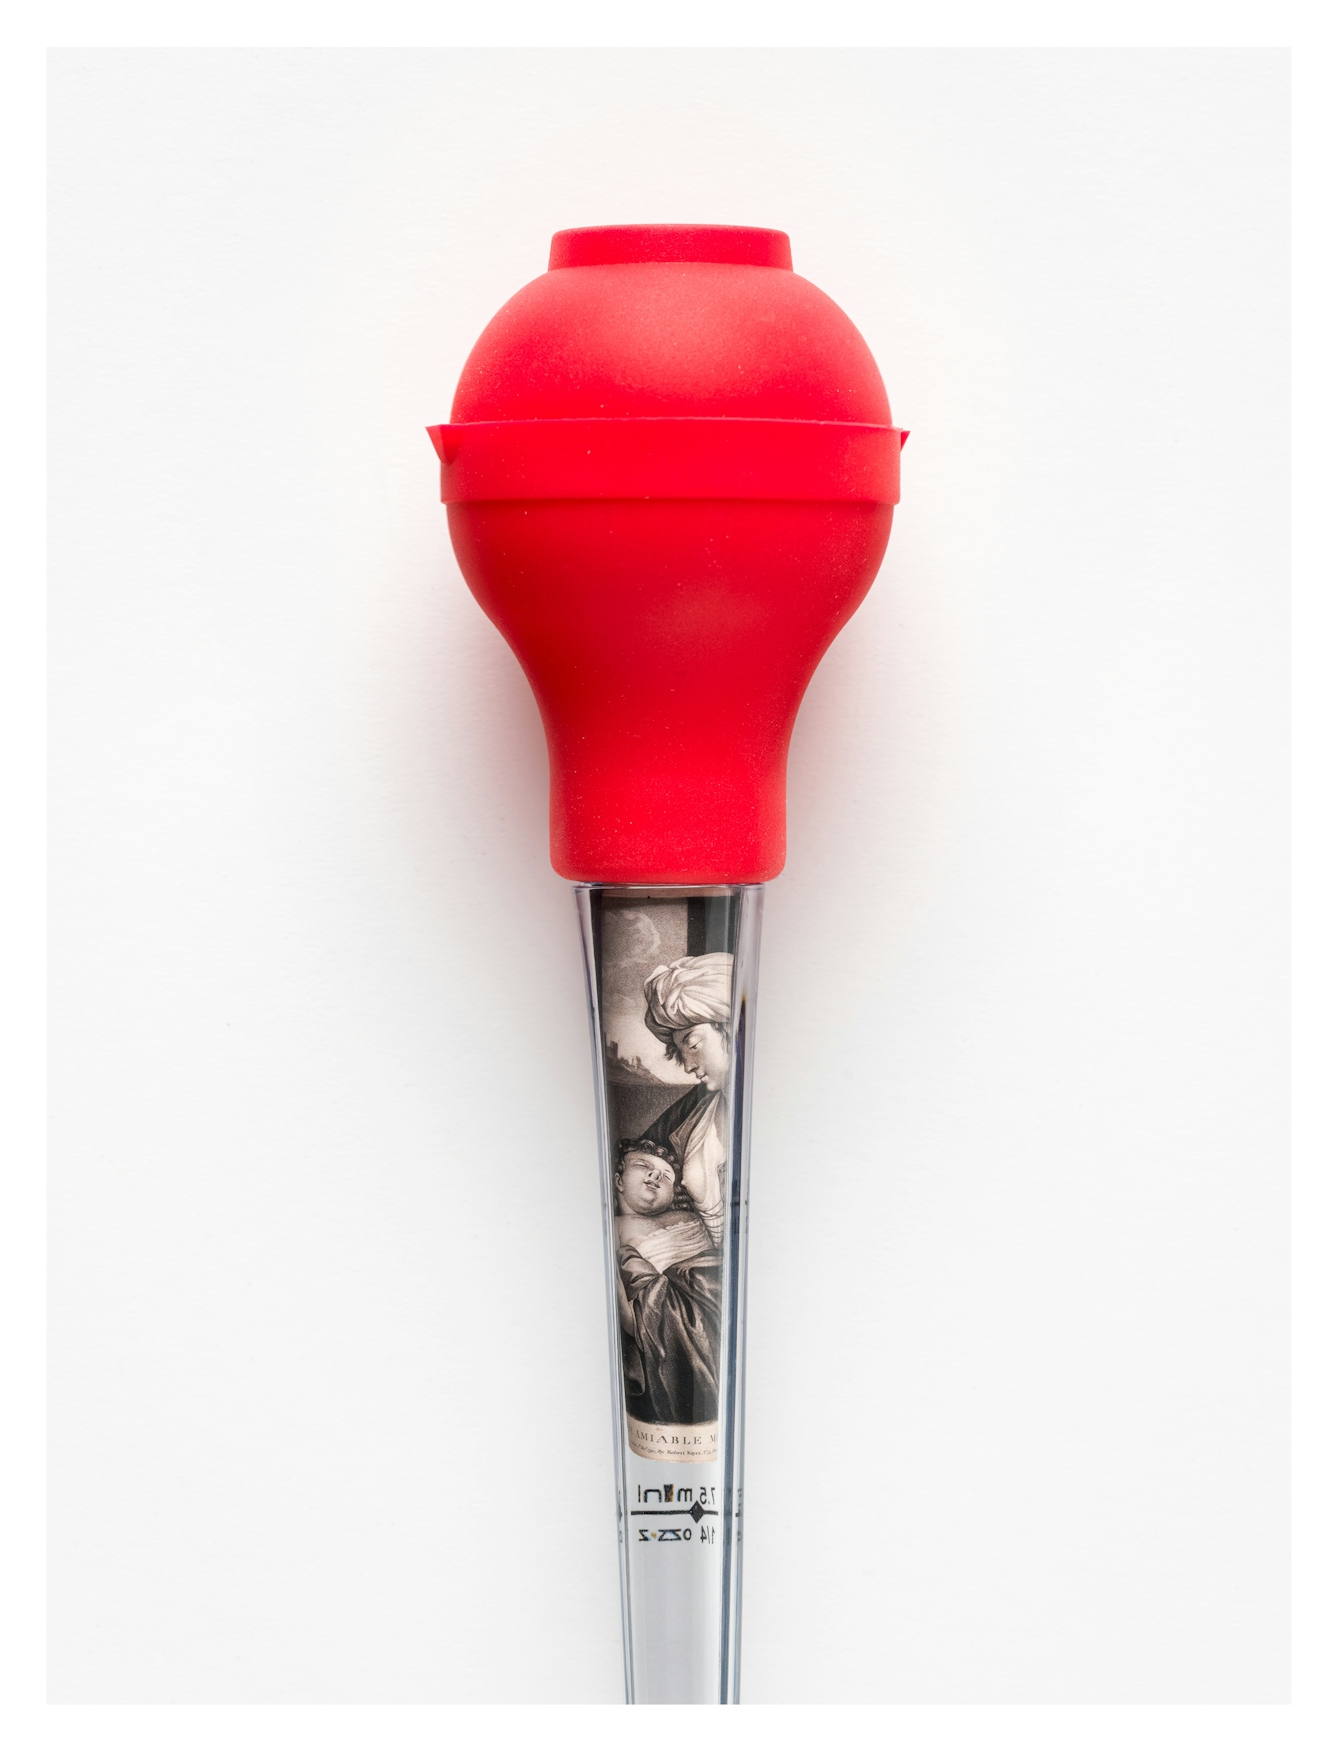 Photograph of a glass turkey-baster with a bright red rubber bulb, against a white background. Rolled up in the glass tube is a monotone etching of a mother with a young child in her arms. The two are gazing towards each other.